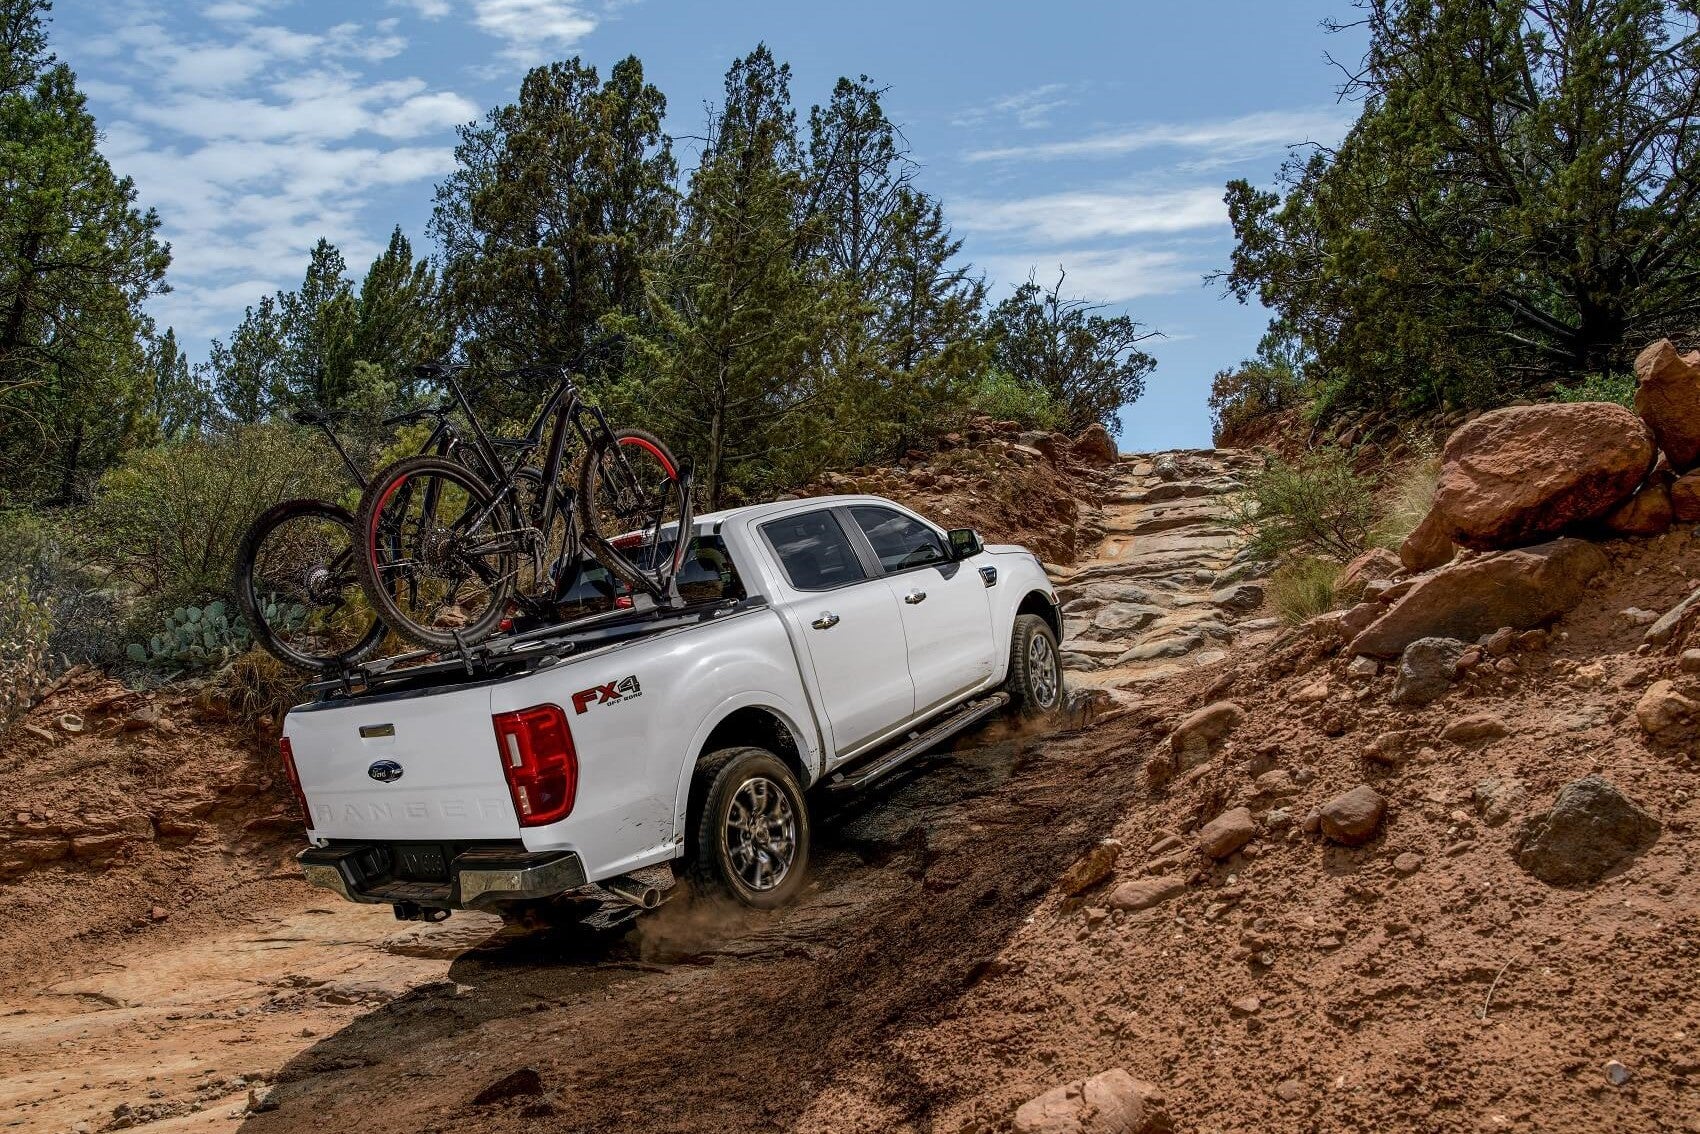 Ford Ranger stores bikes in the bed while driving off-road in the mud